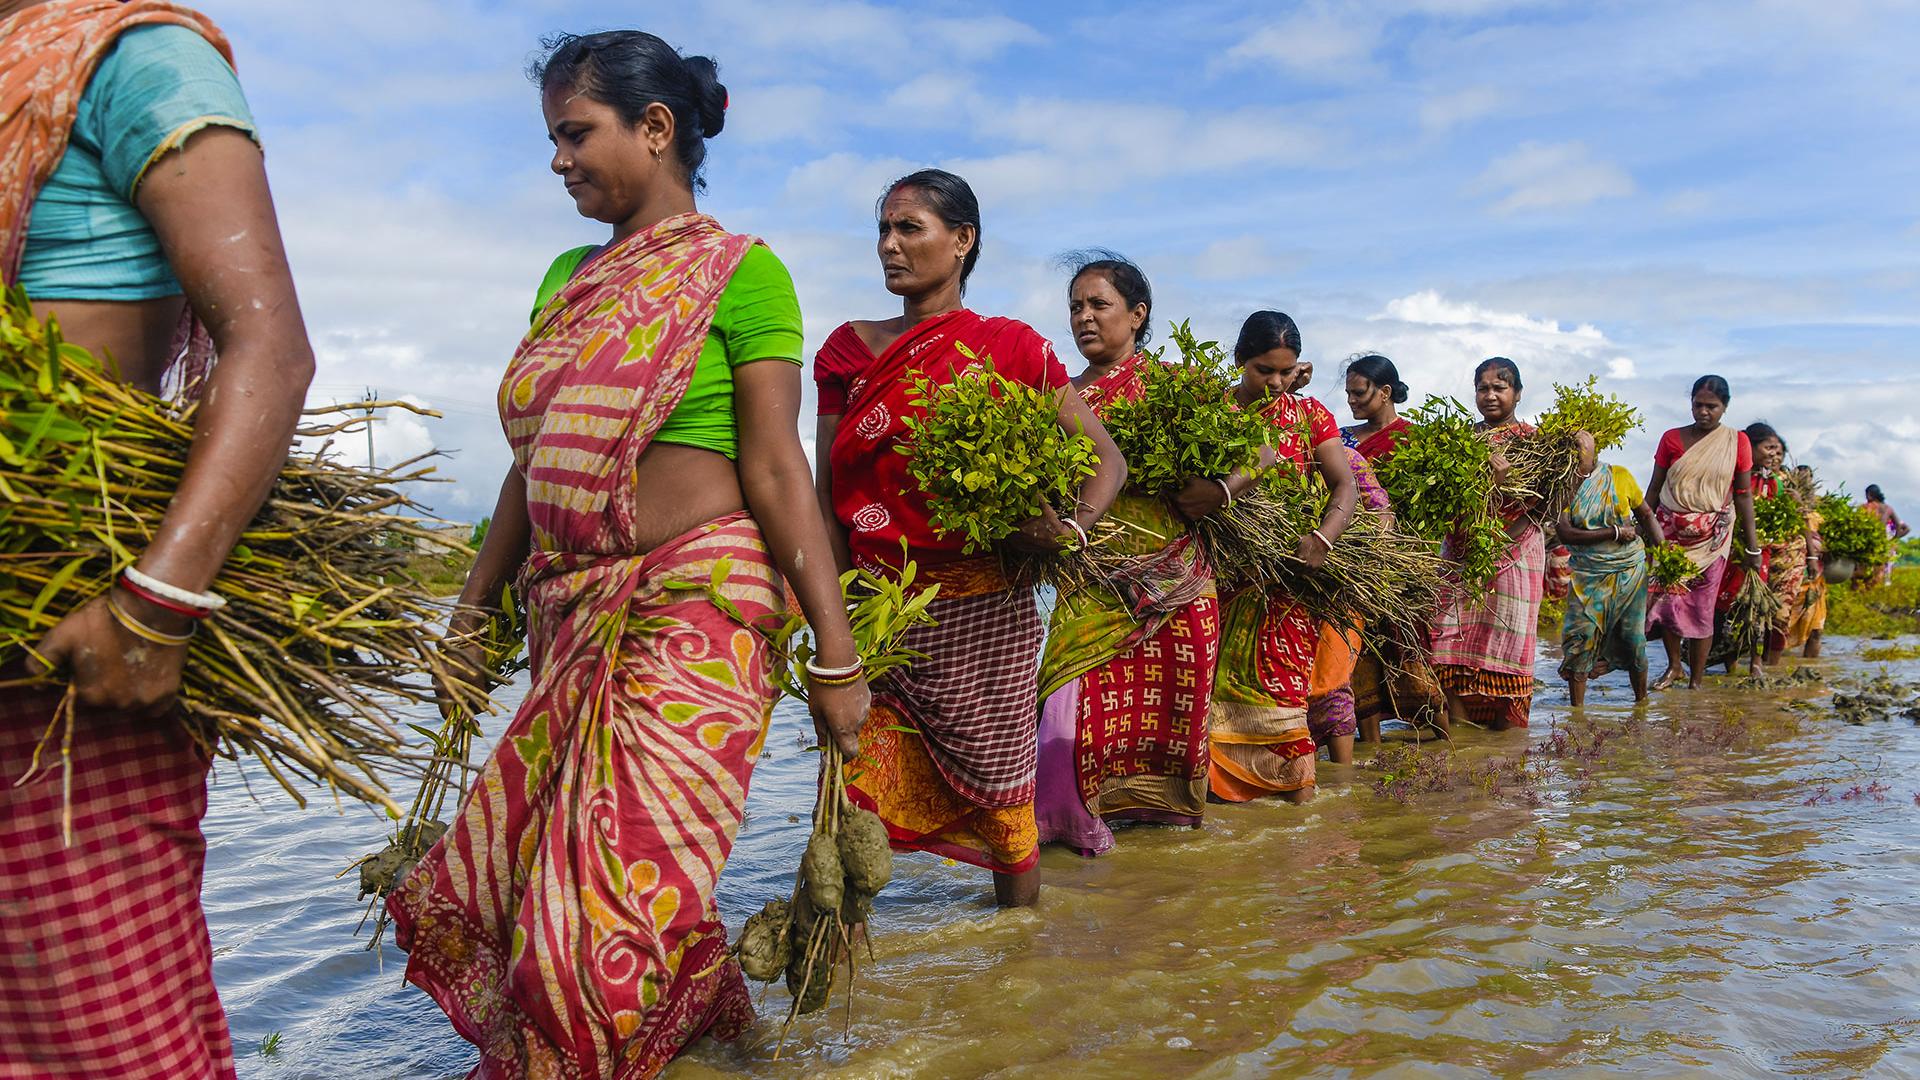 Just as these Indian women are moving forward with determination to replant their mangroves, SCO enters 2023 determined to deliver new operational tools, including global mangrove monitoring. 